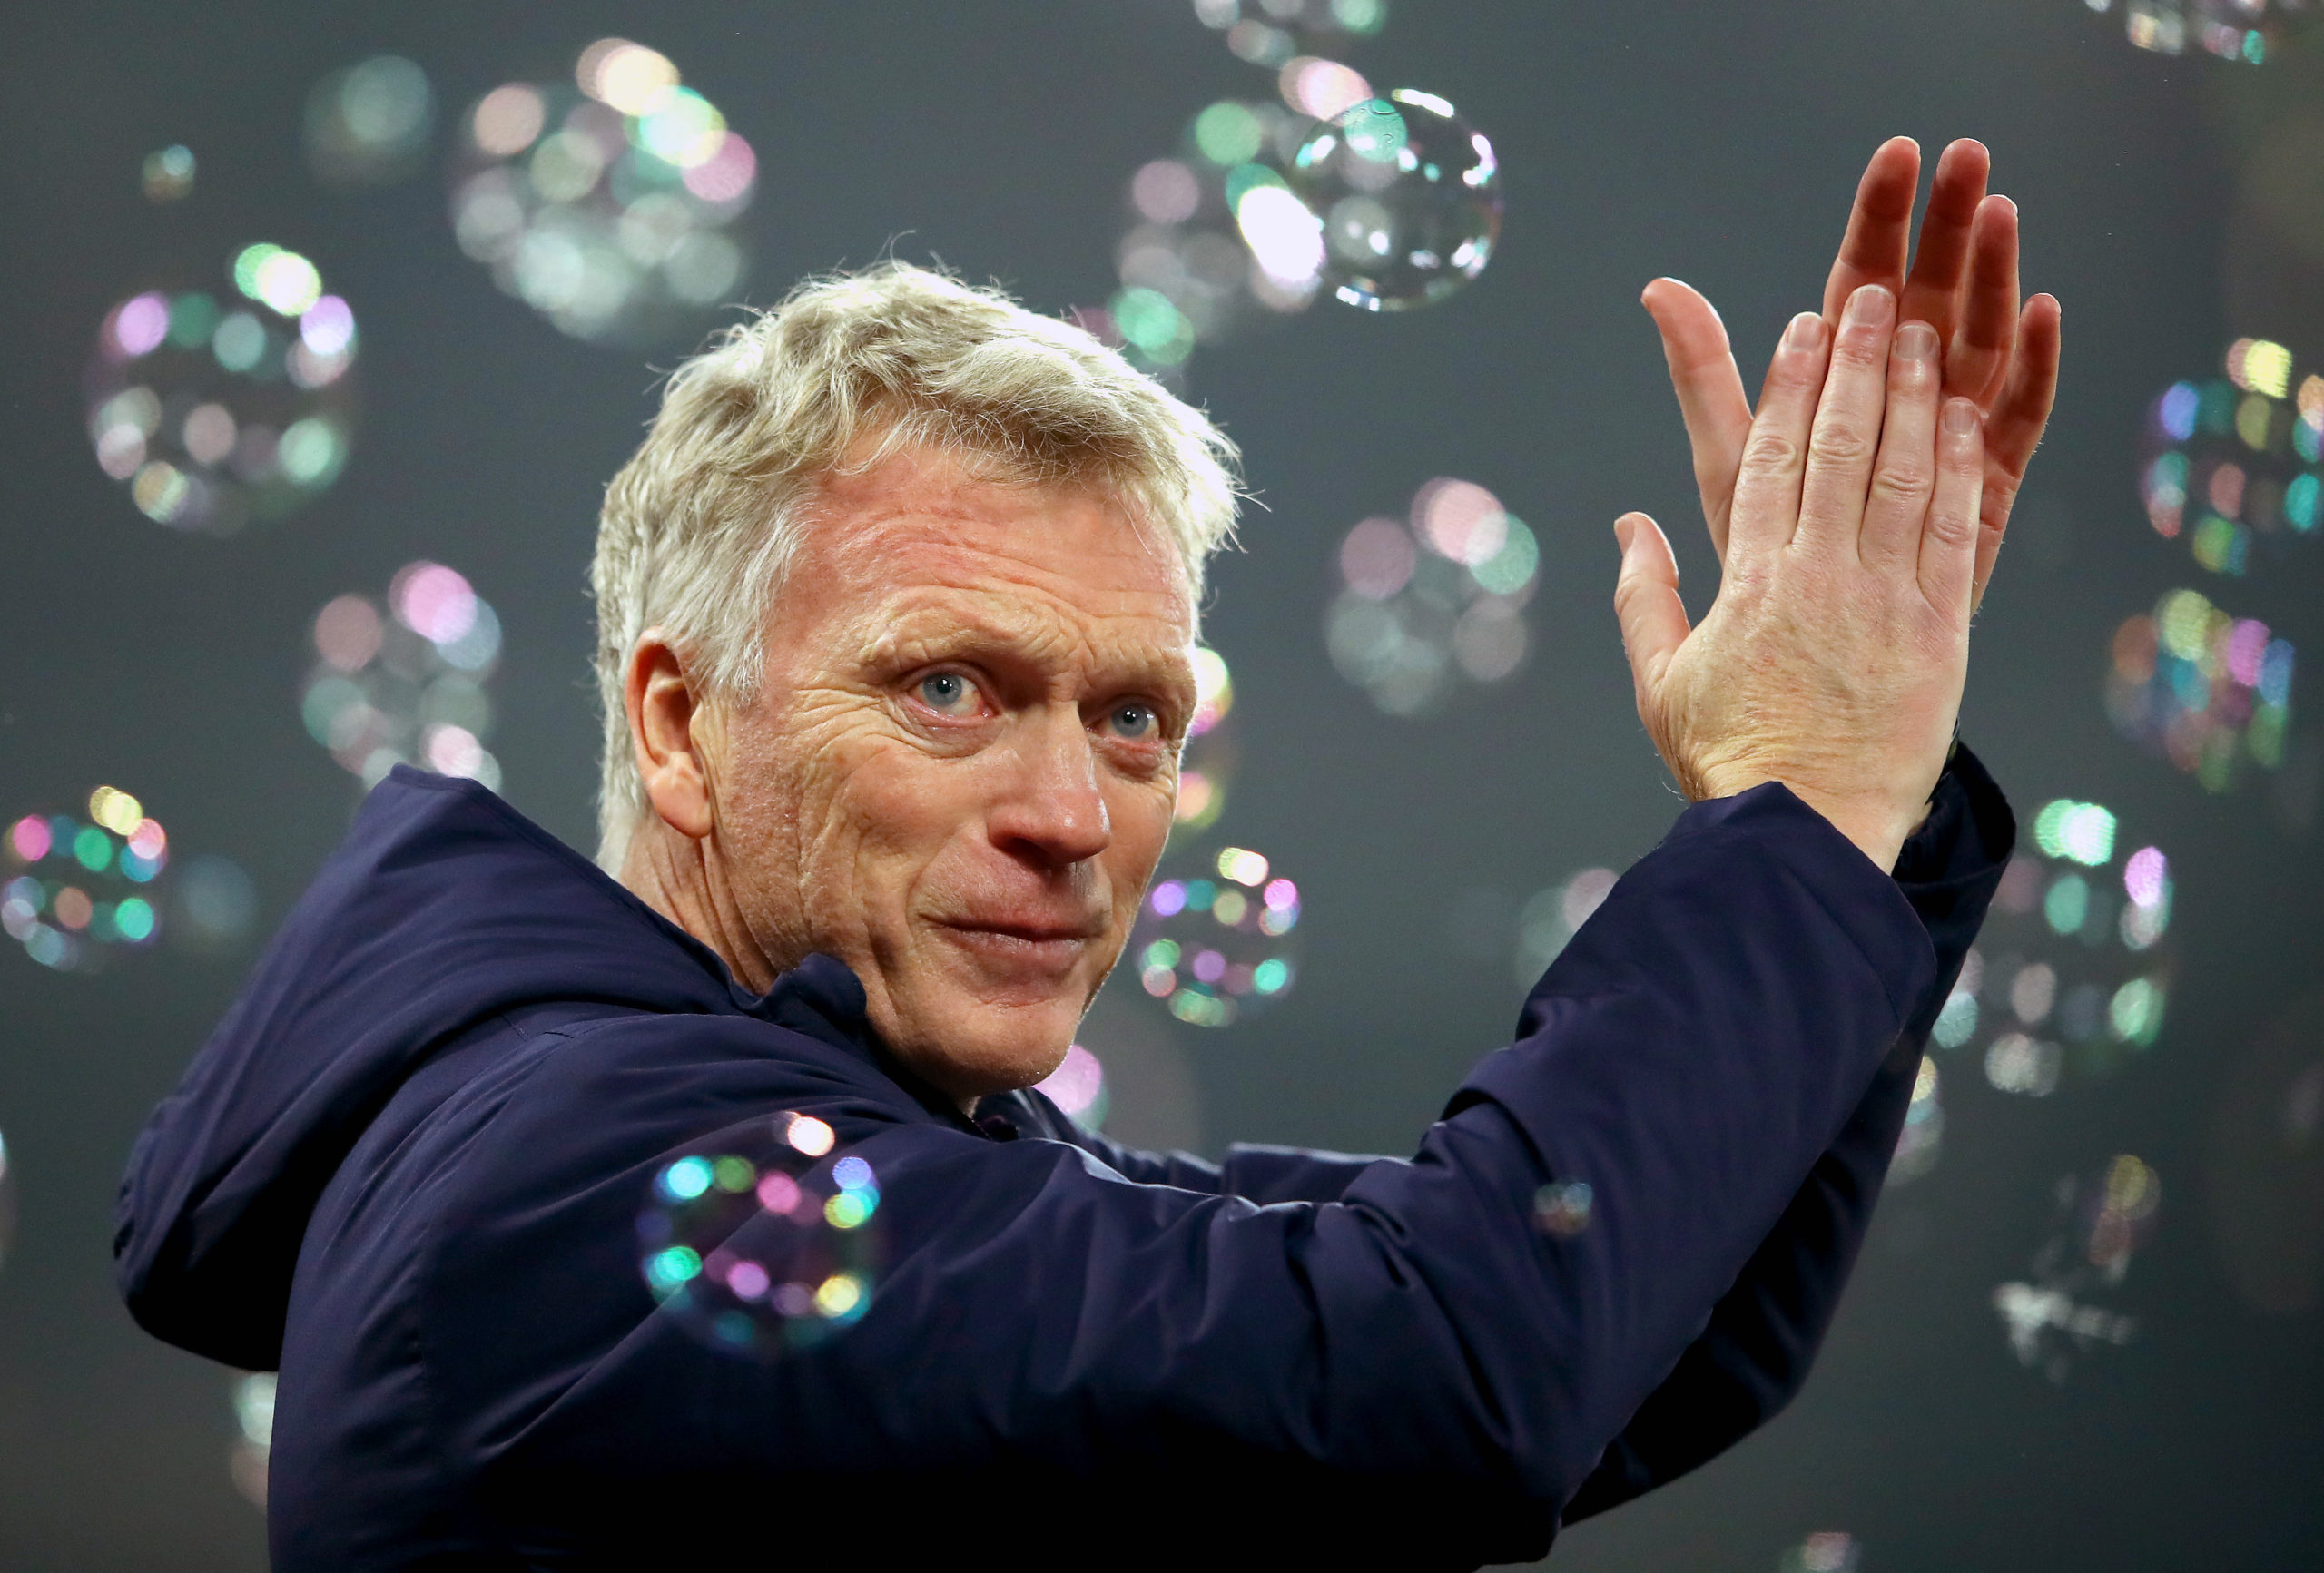 David Moyes names two 'sensational' recent West Ham signings who've made every other player raise their standards